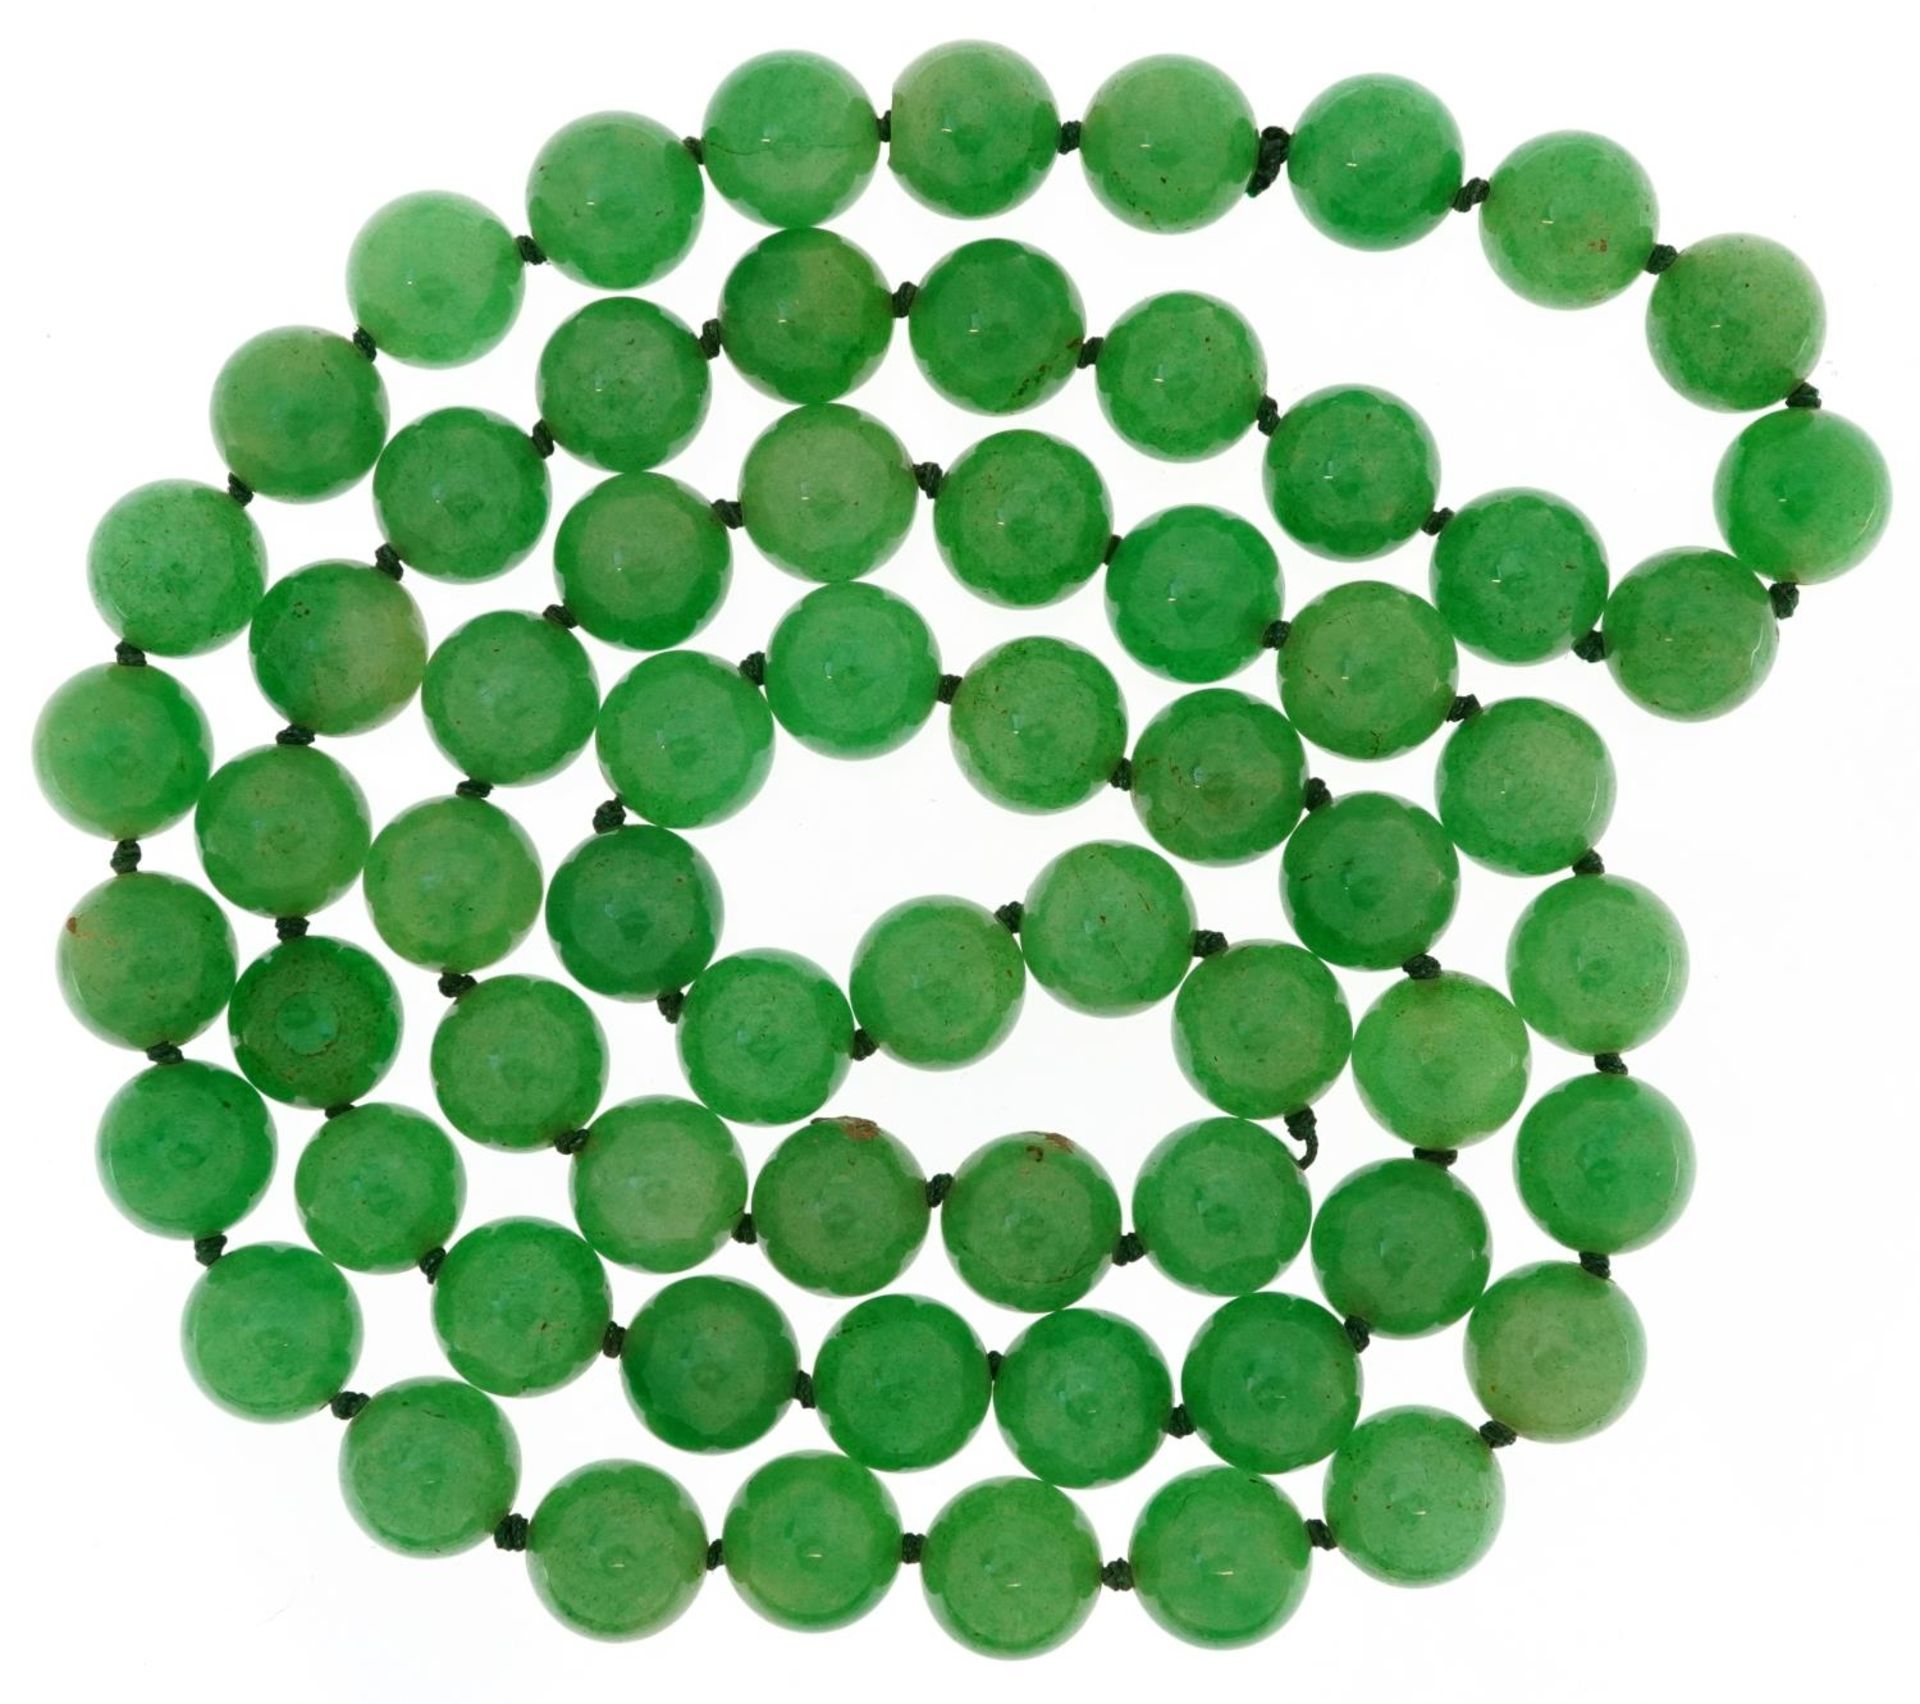 Chinese green jade bead necklace, each bead 12mm in diameter, overall 90cm in length, 159.2g - Image 2 of 2